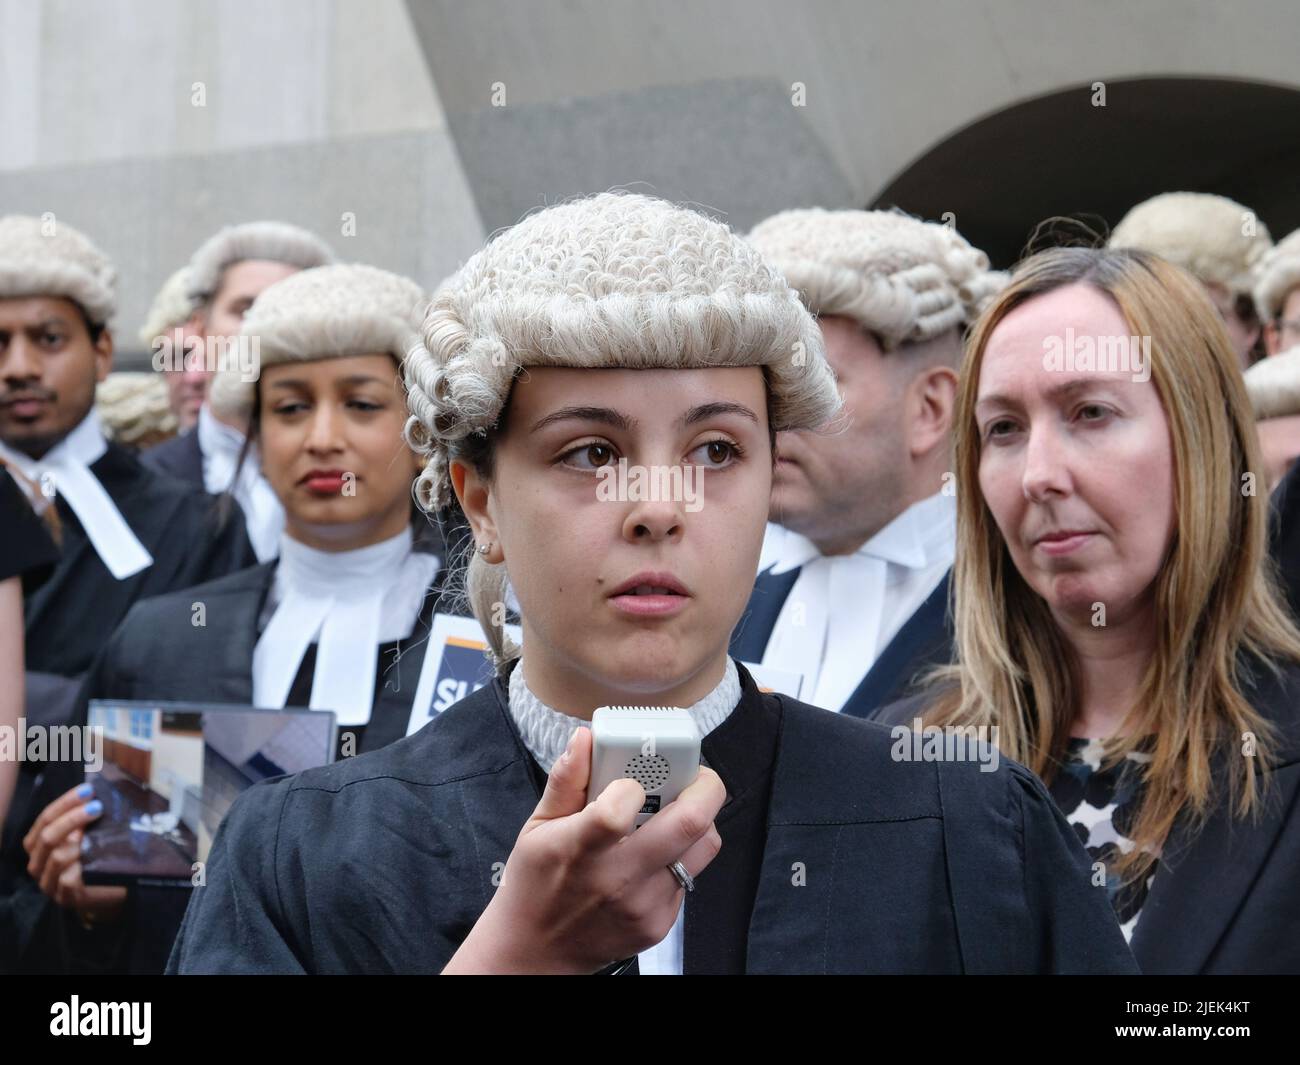 London, UK, 27th June, 2022. Alejandra Llorente Tascon addresses the crowd gathered outside the Old Bailey as criminal barristers across England and Wales begin strike action over legal aid payments. Hundreds of barristers and solicitors joined the picket outside the Central Criminal Court, also known as the Old Bailey in strike action today and tomorrow this week, and set to continue for a month. Credit: Eleventh Hour Photography/Alamy Live News Stock Photo